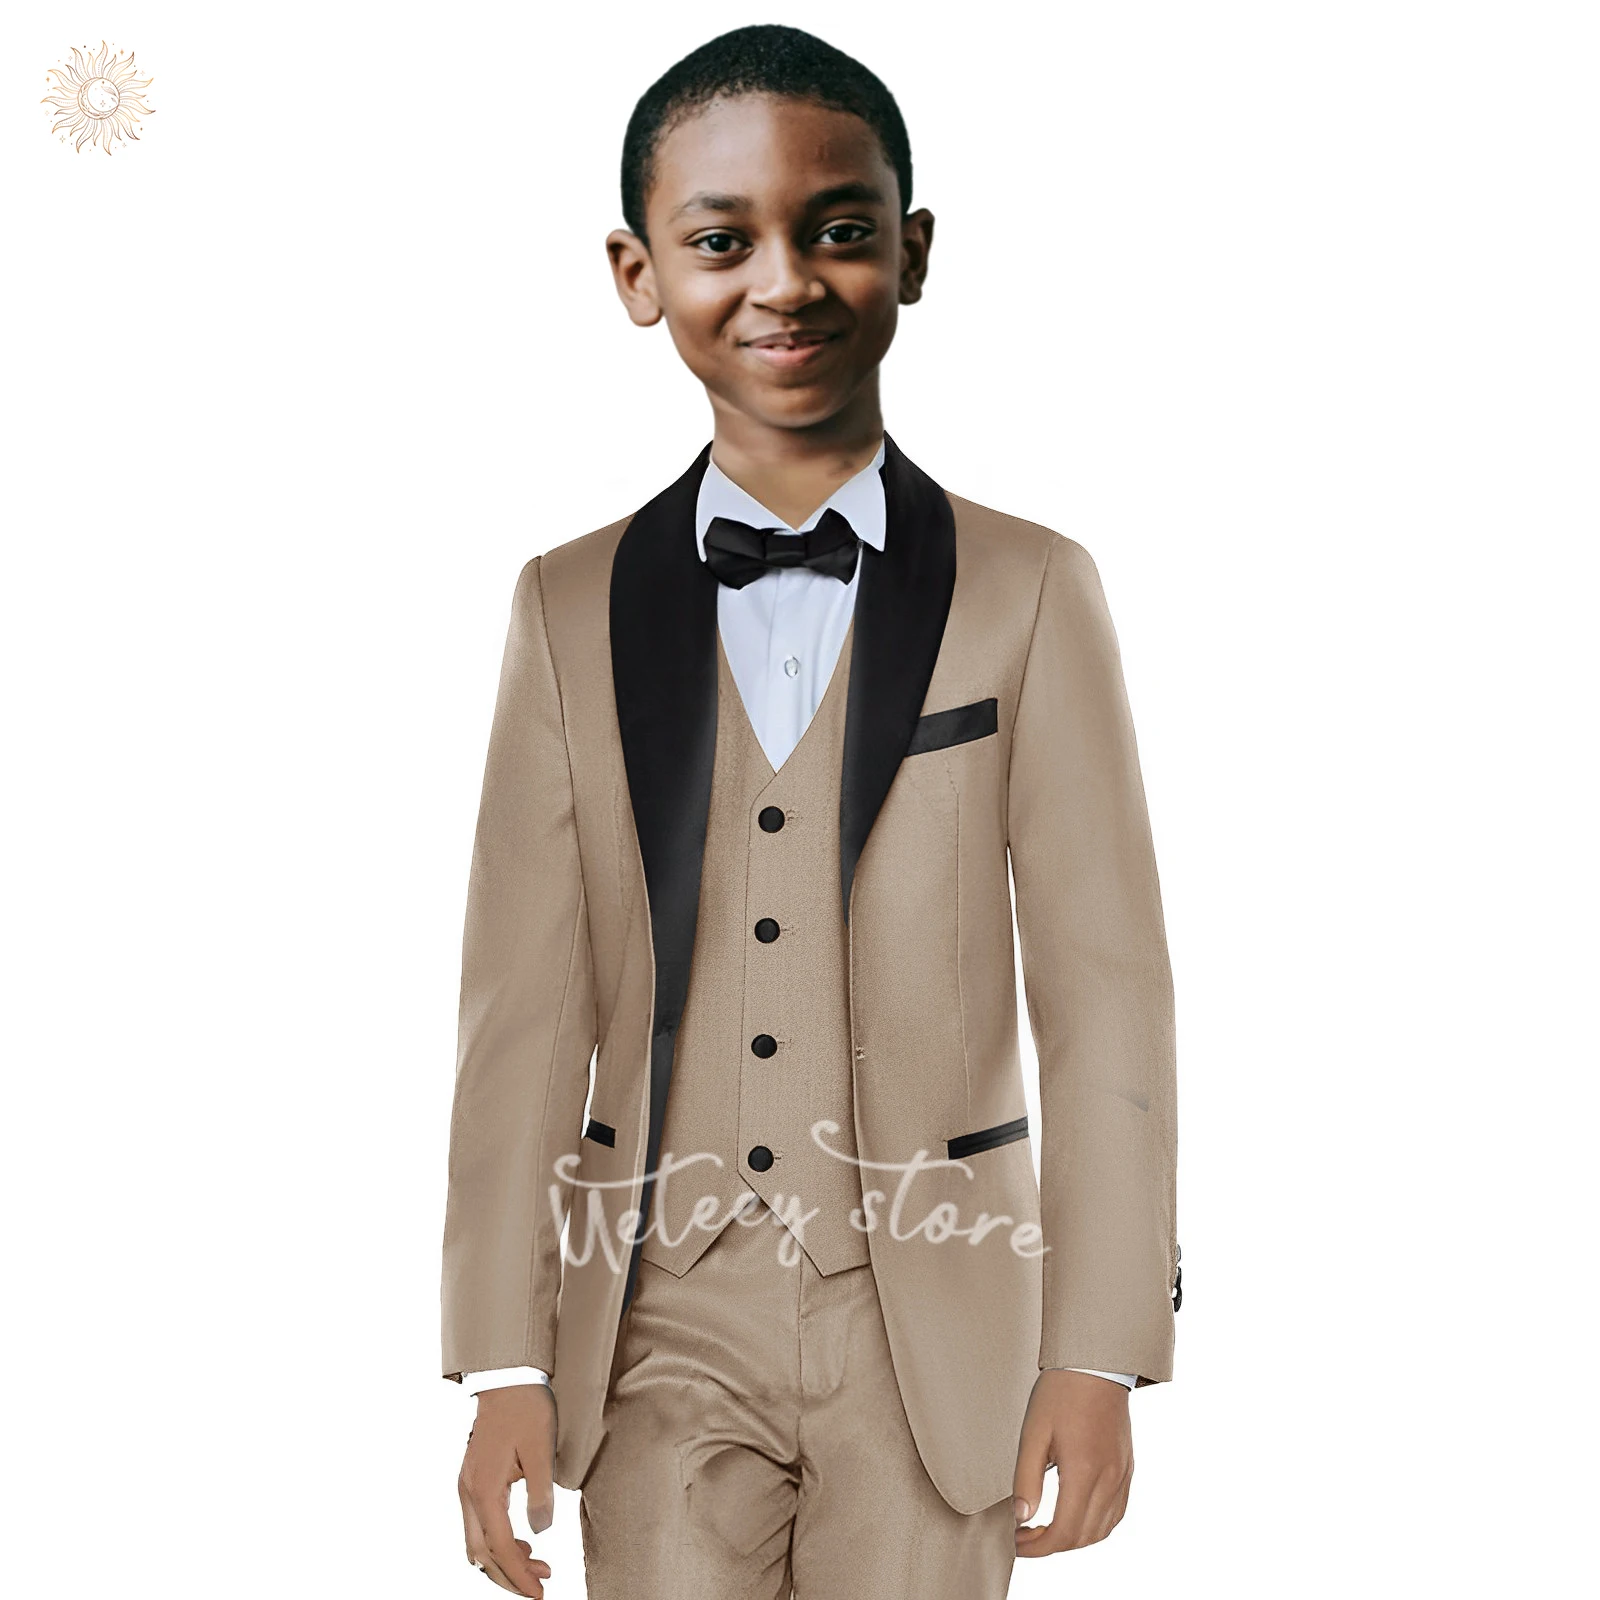 

UETEEY Boys Suits Solid Slim Fit Tuxedo 3 Piece Set with Blazer Jacket Dressing Pants Vest for Kids Wedding Prom Ring Bearer Out